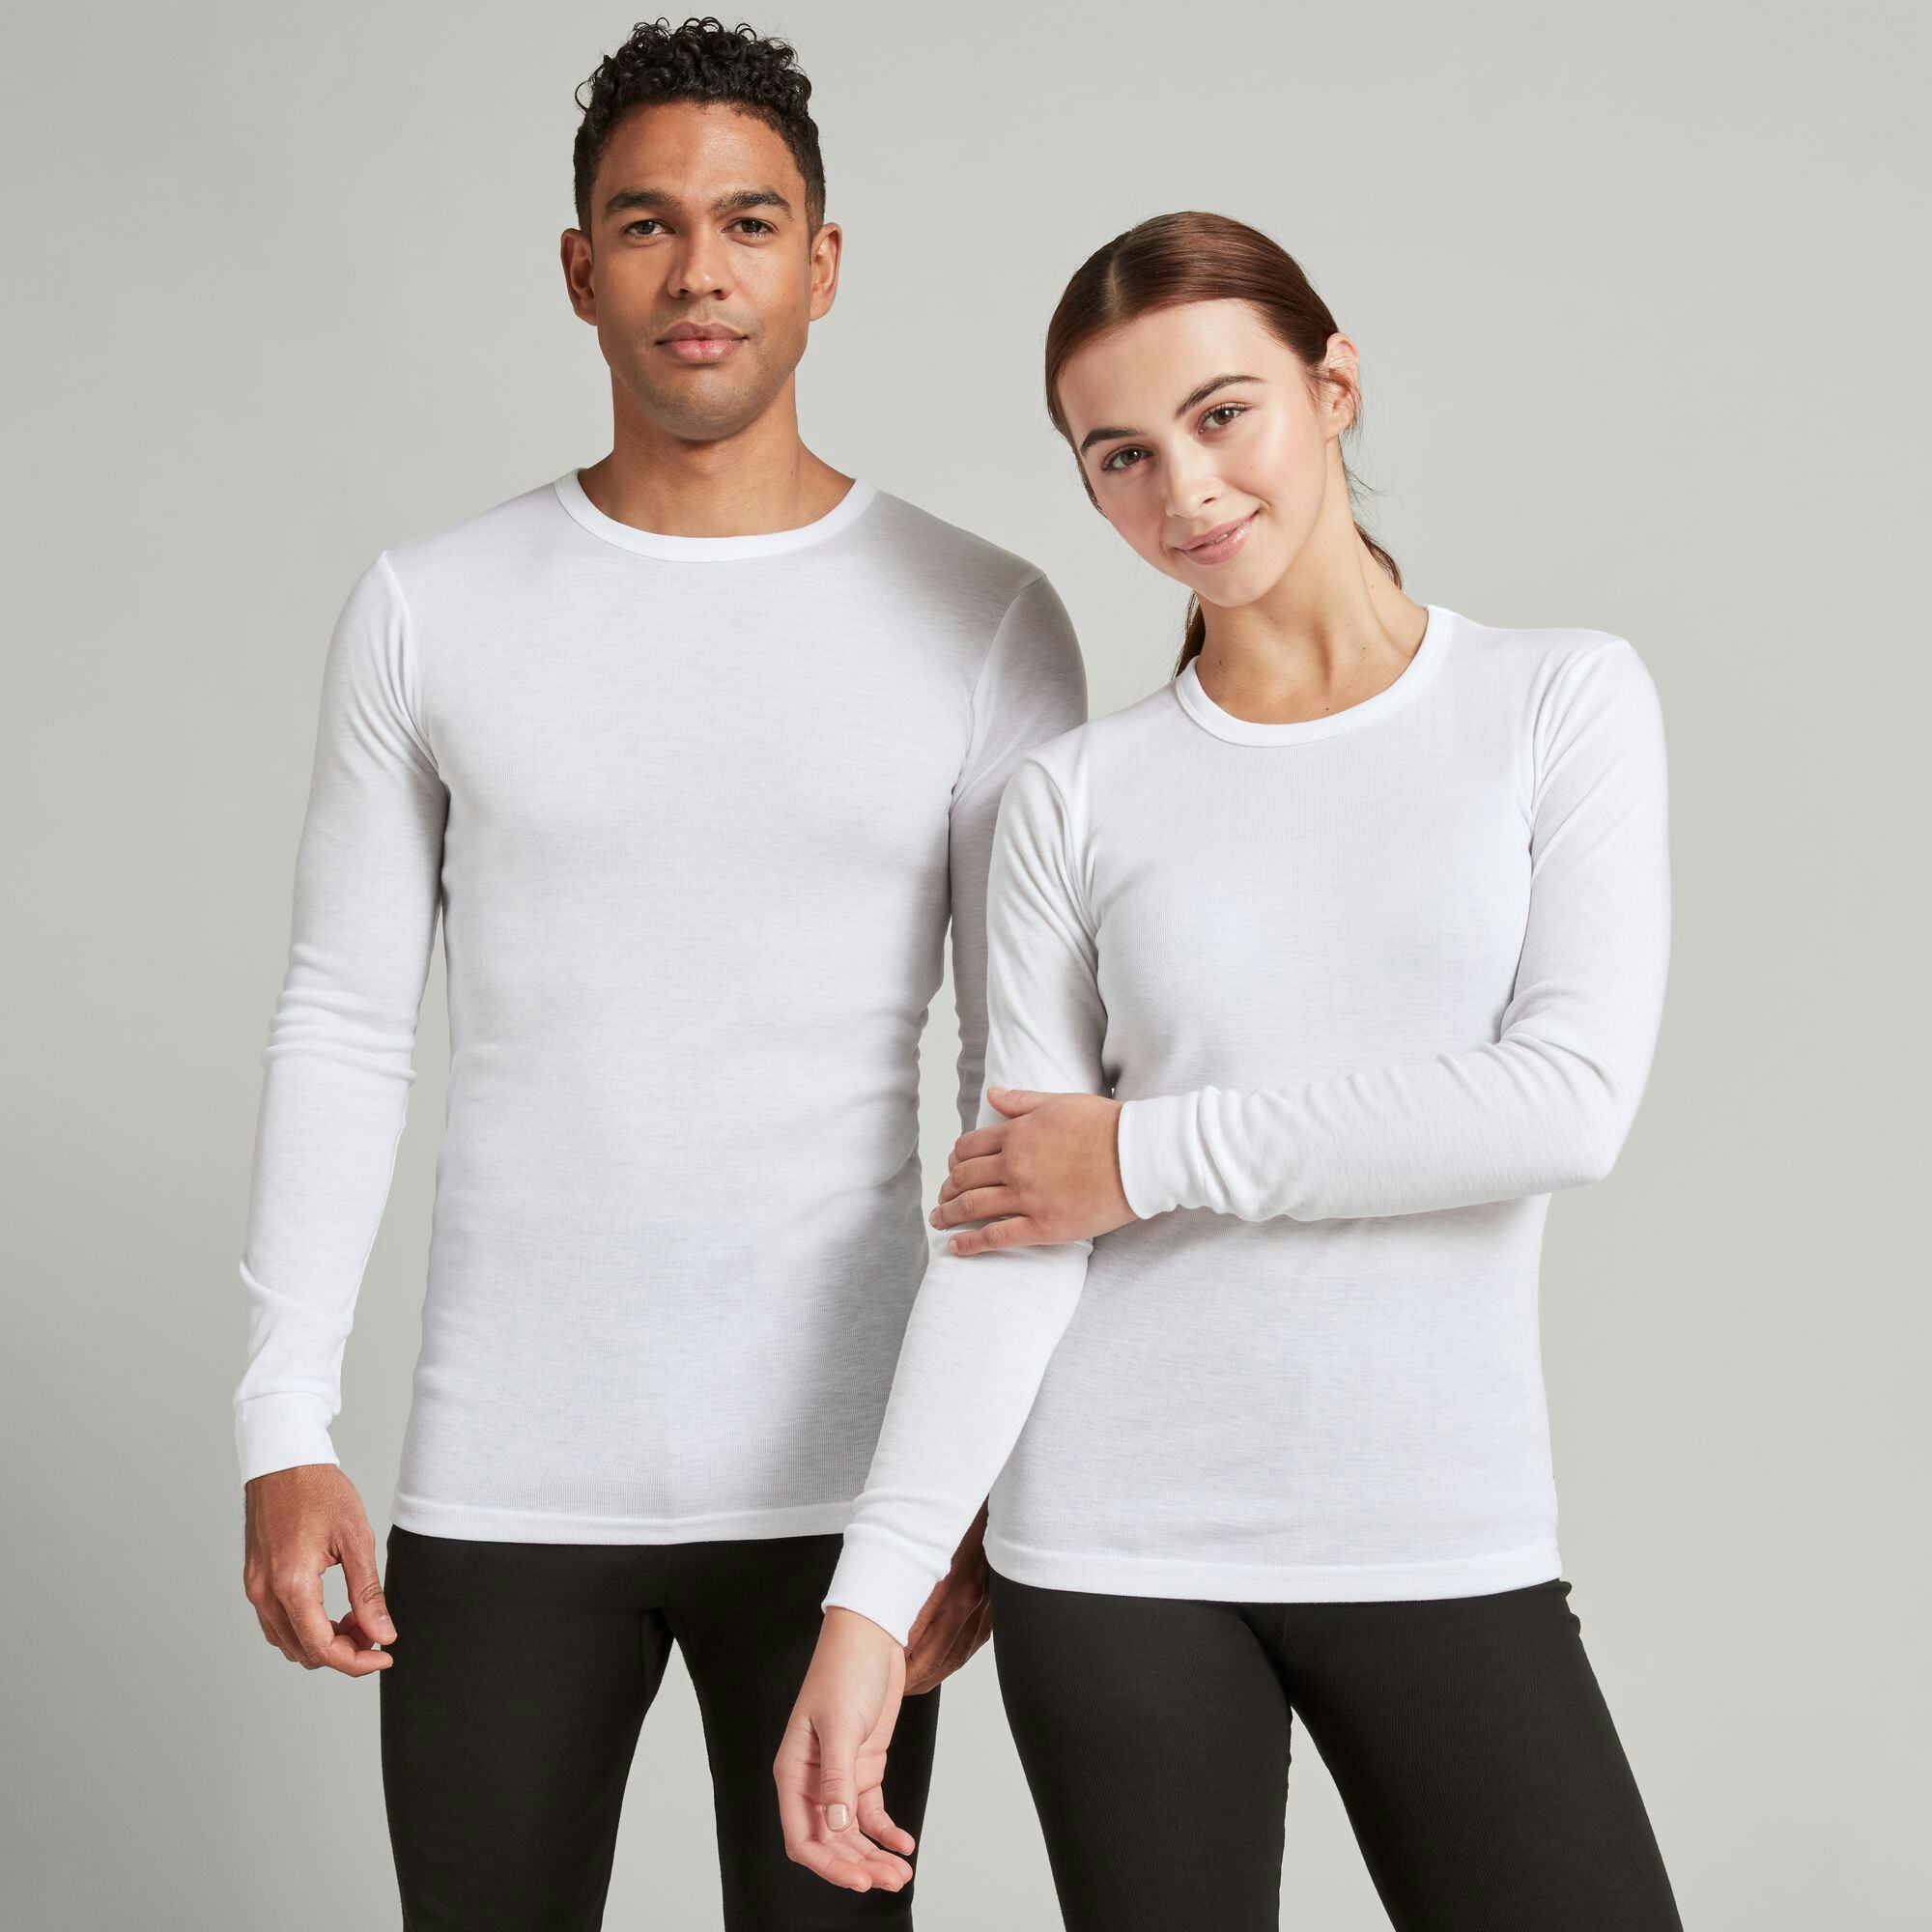 Gender-neutral clothing, thermals and sweats